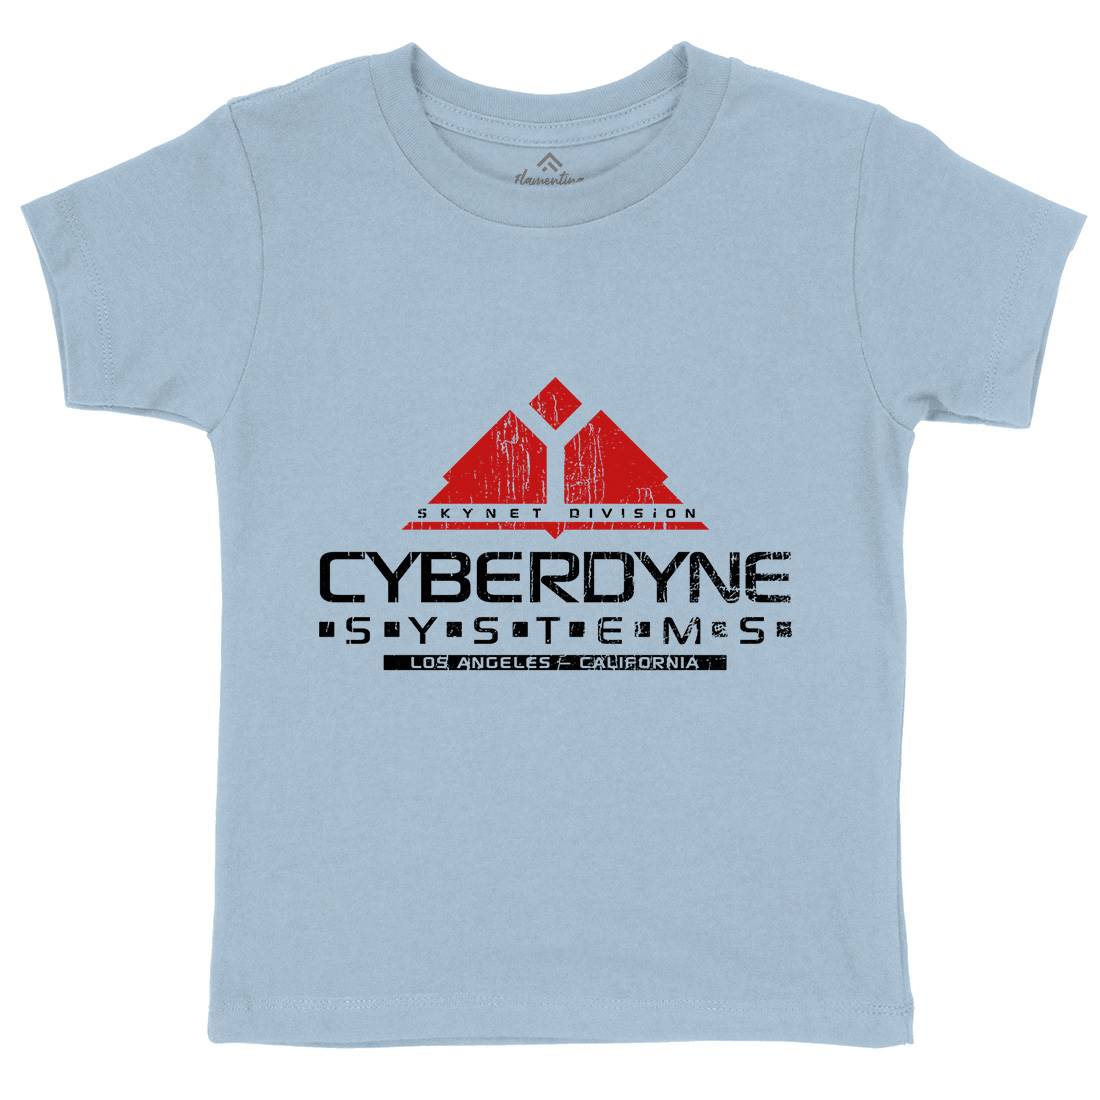 Cyberdyne Systems Kids Crew Neck T-Shirt Space D122